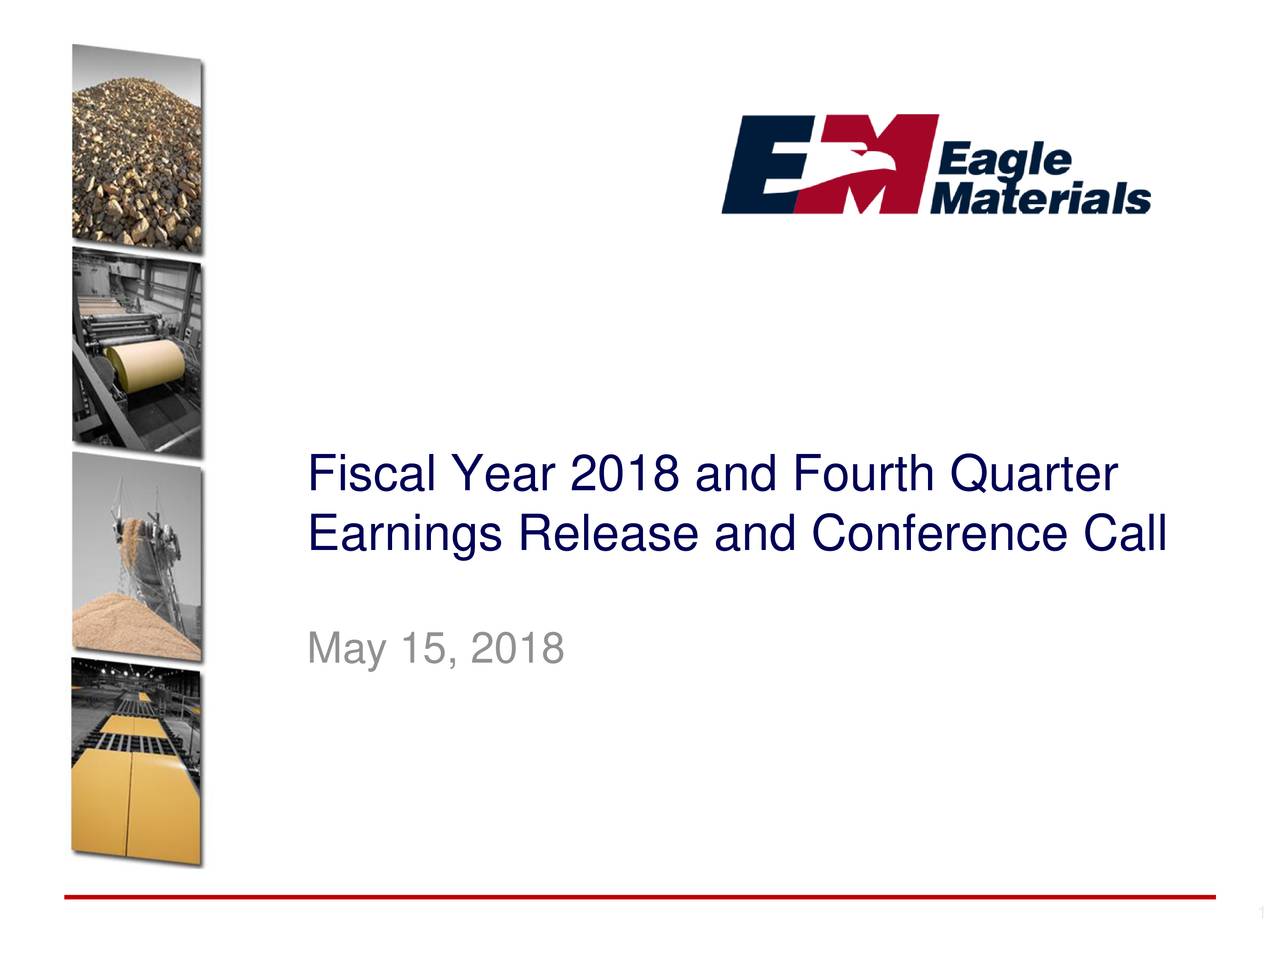 Fiscal Year 2018 and Fourth Quarter